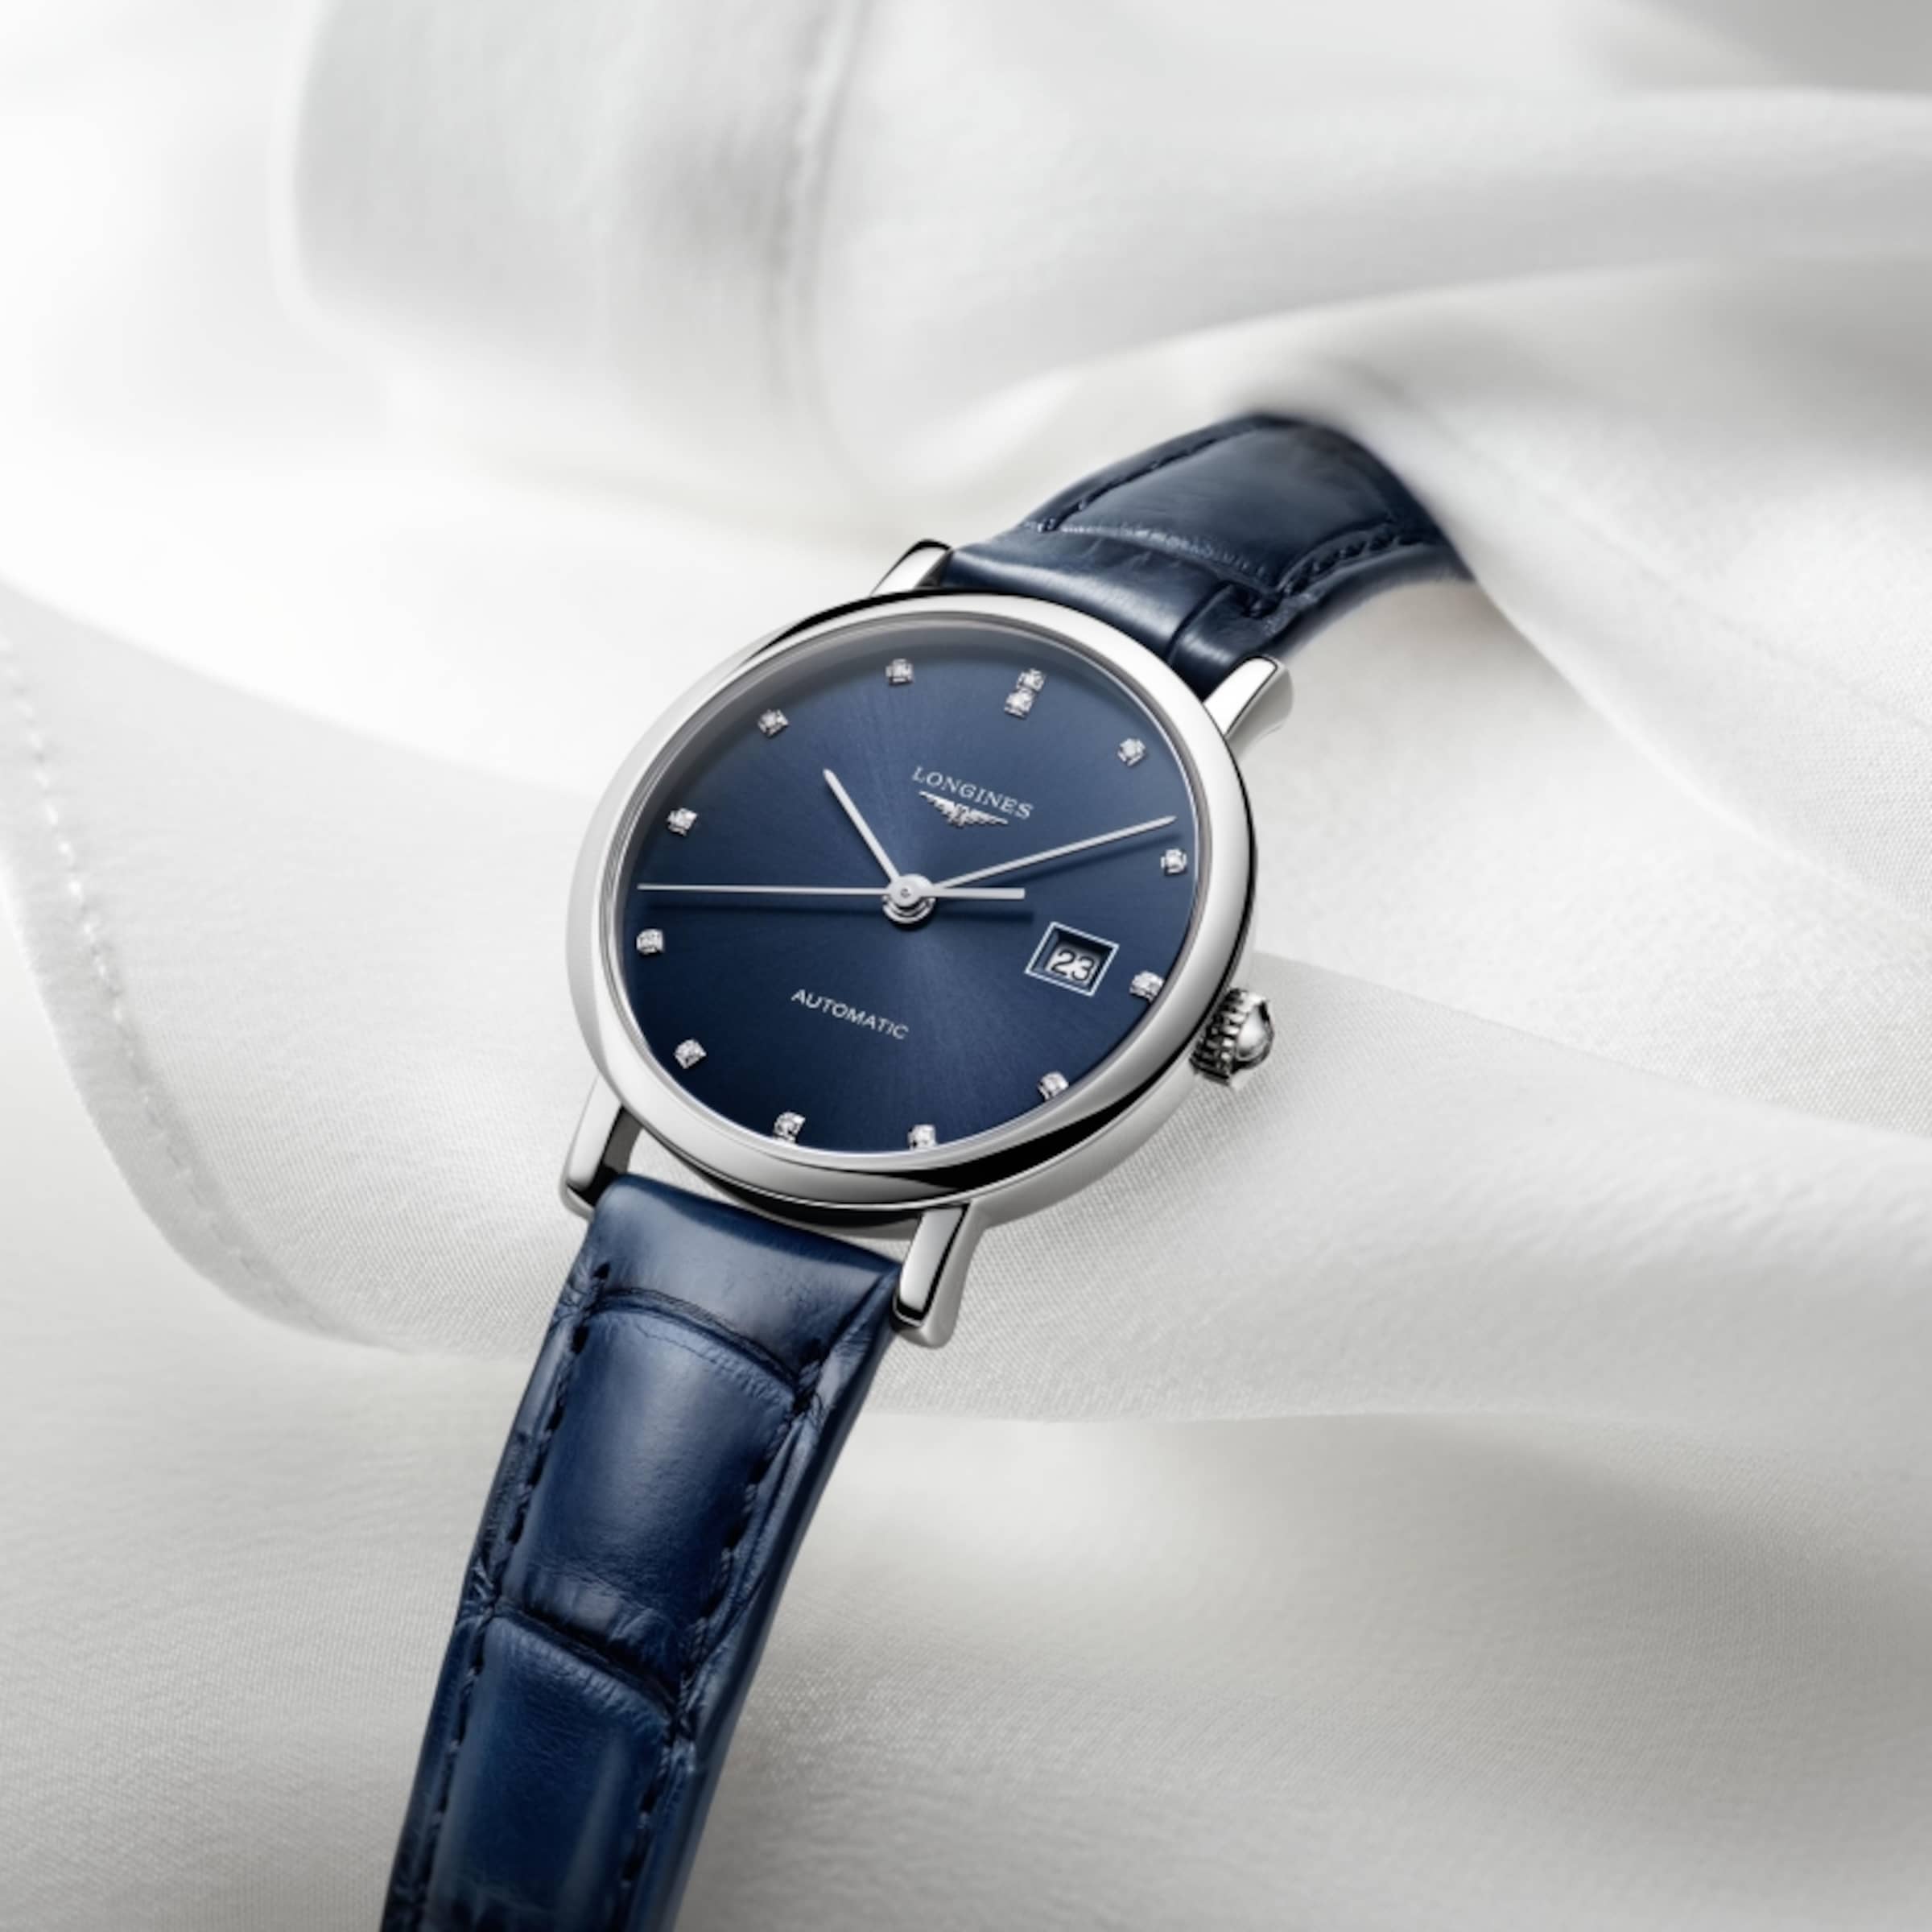 A blue model of The Longines Elegant Collection watch on a white fabric